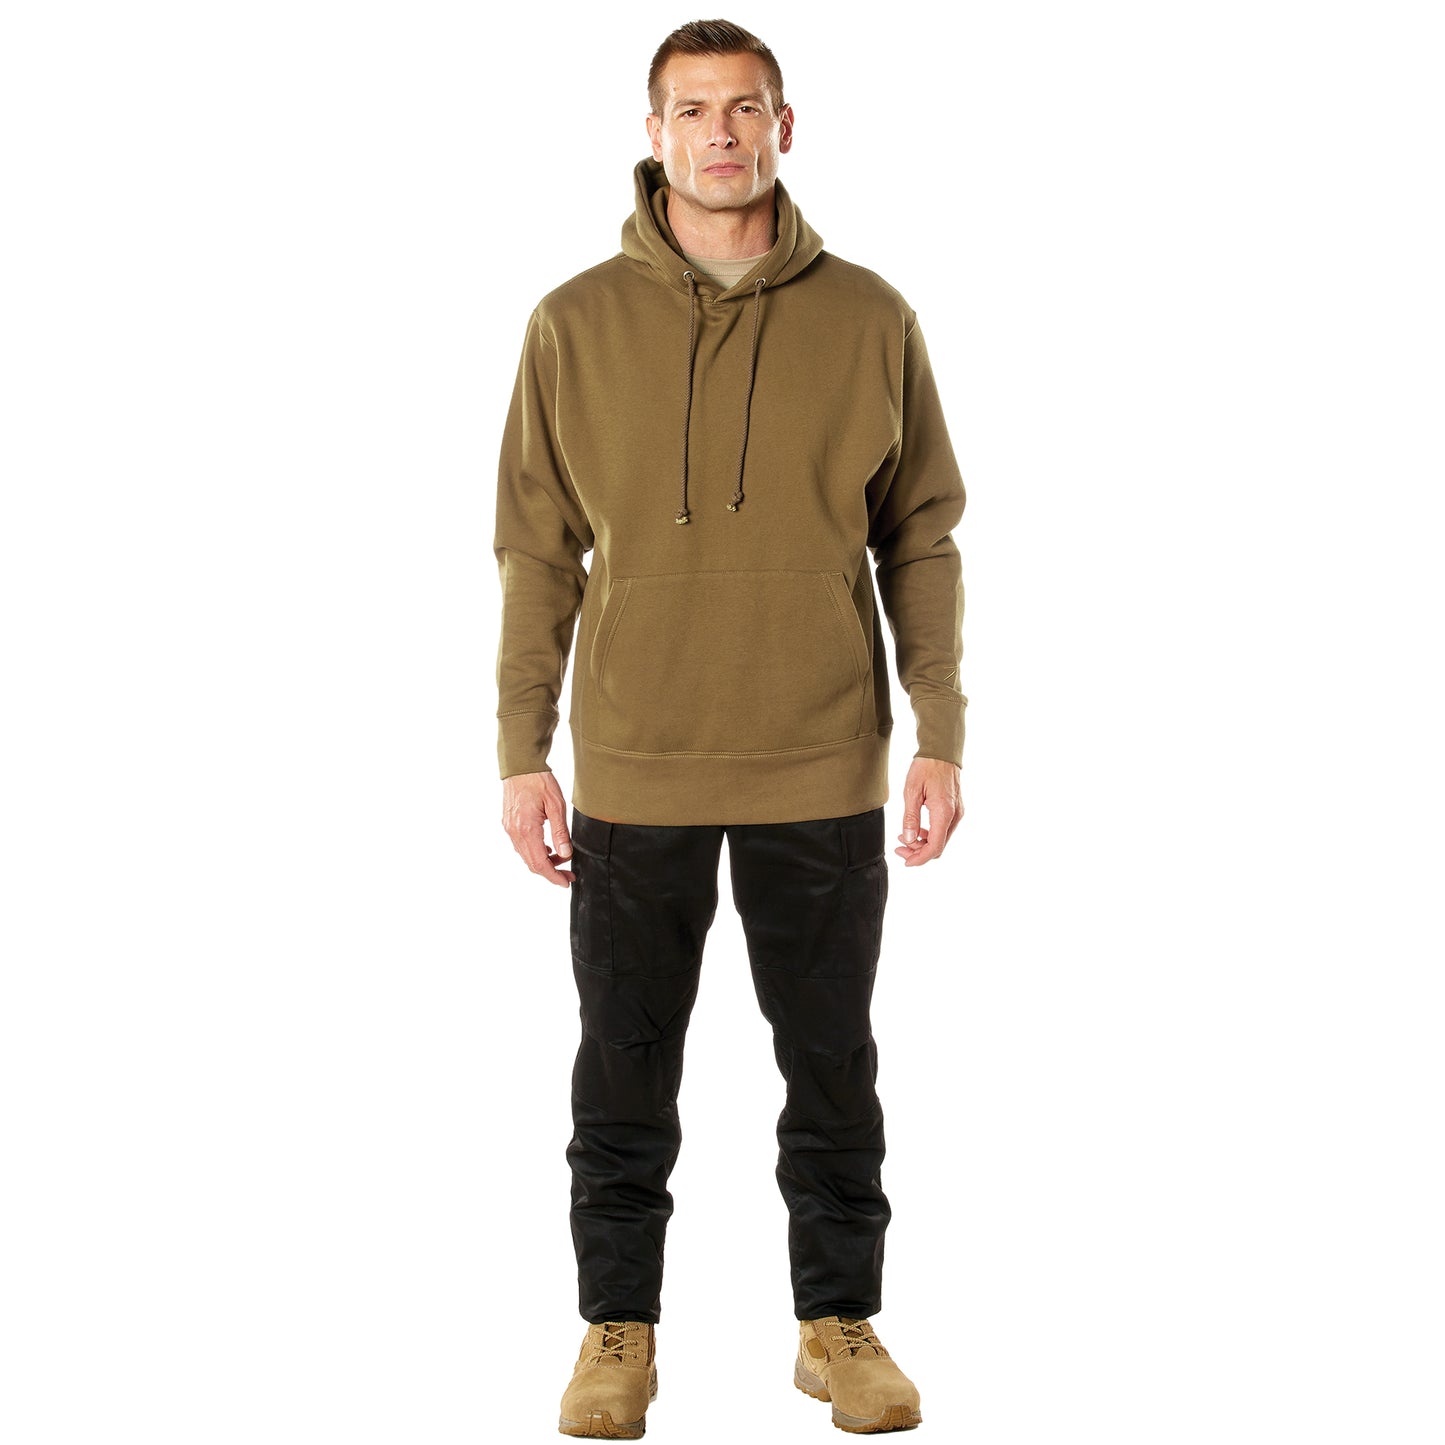 Rothco Every Day Pullover Hooded Sweatshirts